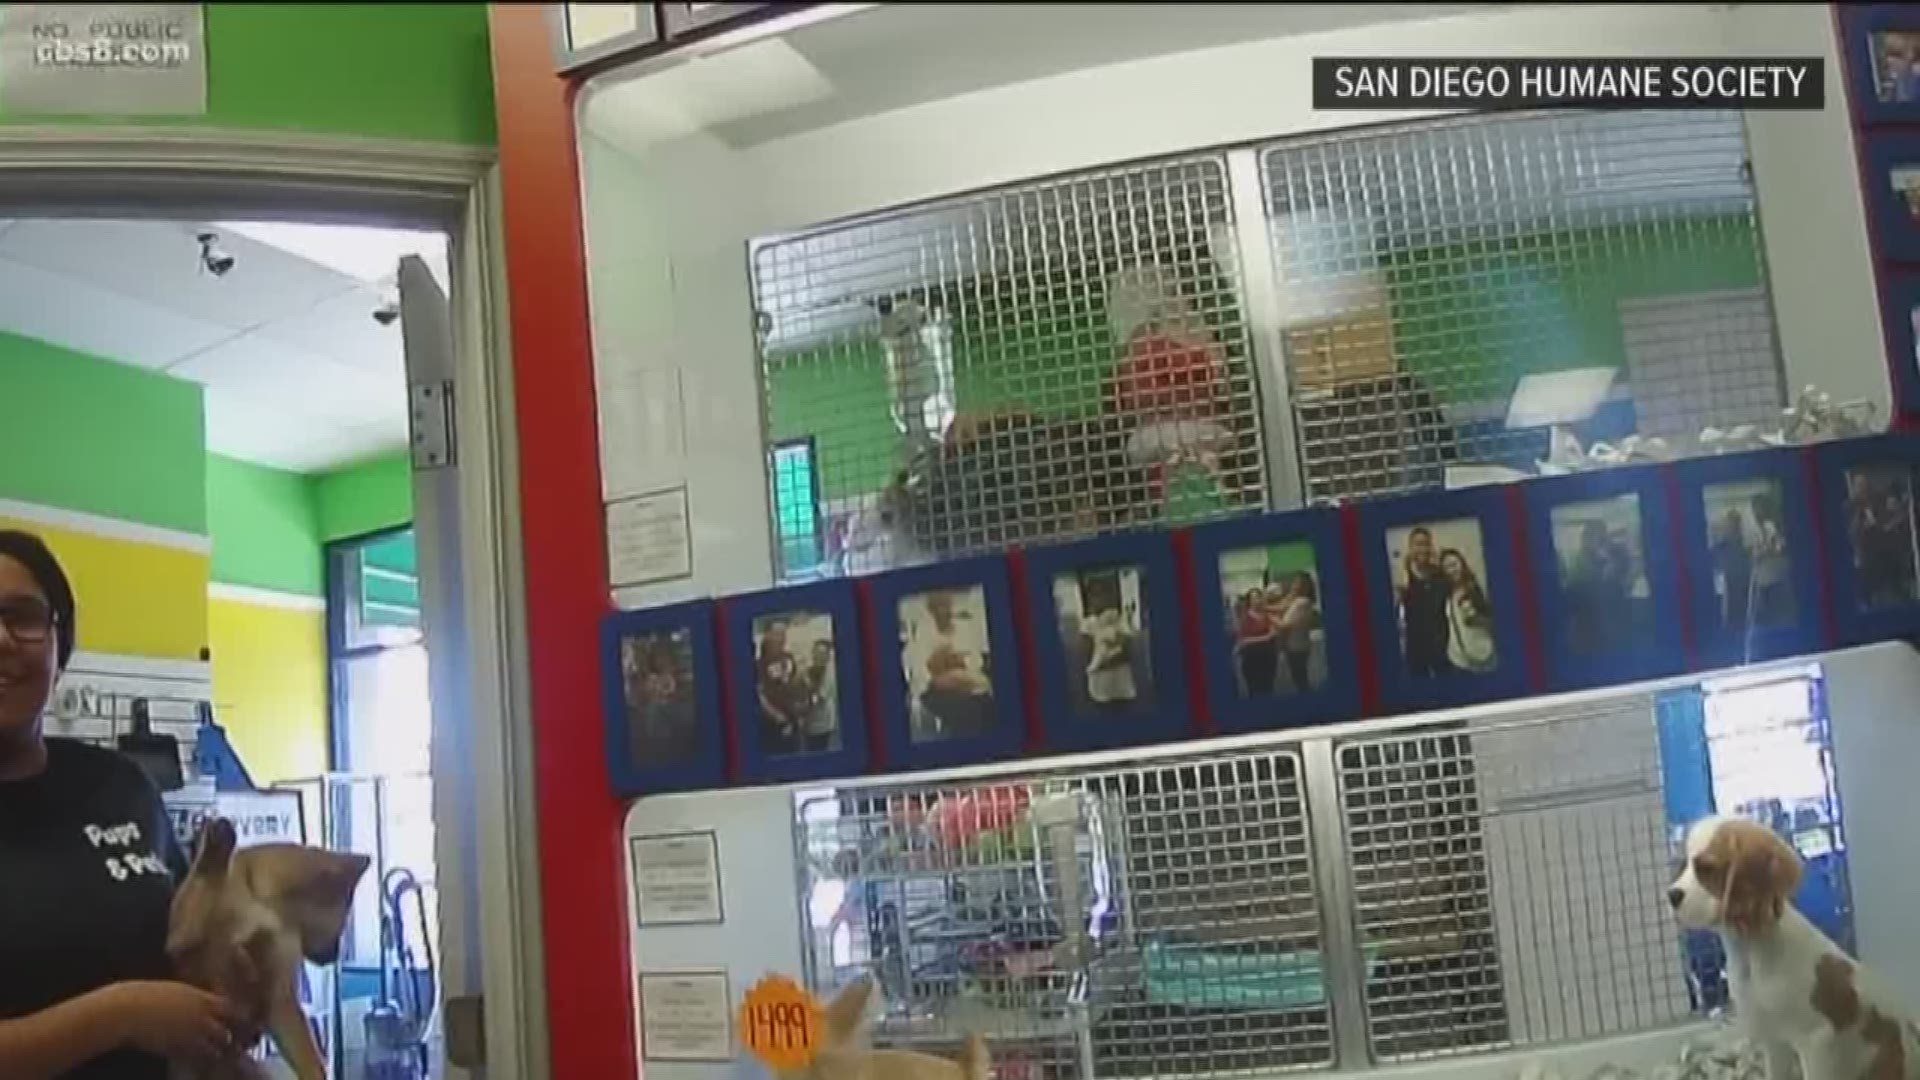 The San Diego Humane Society announced today that its Humane Law Enforcement division conducted a one-day sweep of pet stores and issued more than 100 citations for violations of a partial state ban on the sale of dogs, cats and rabbits.